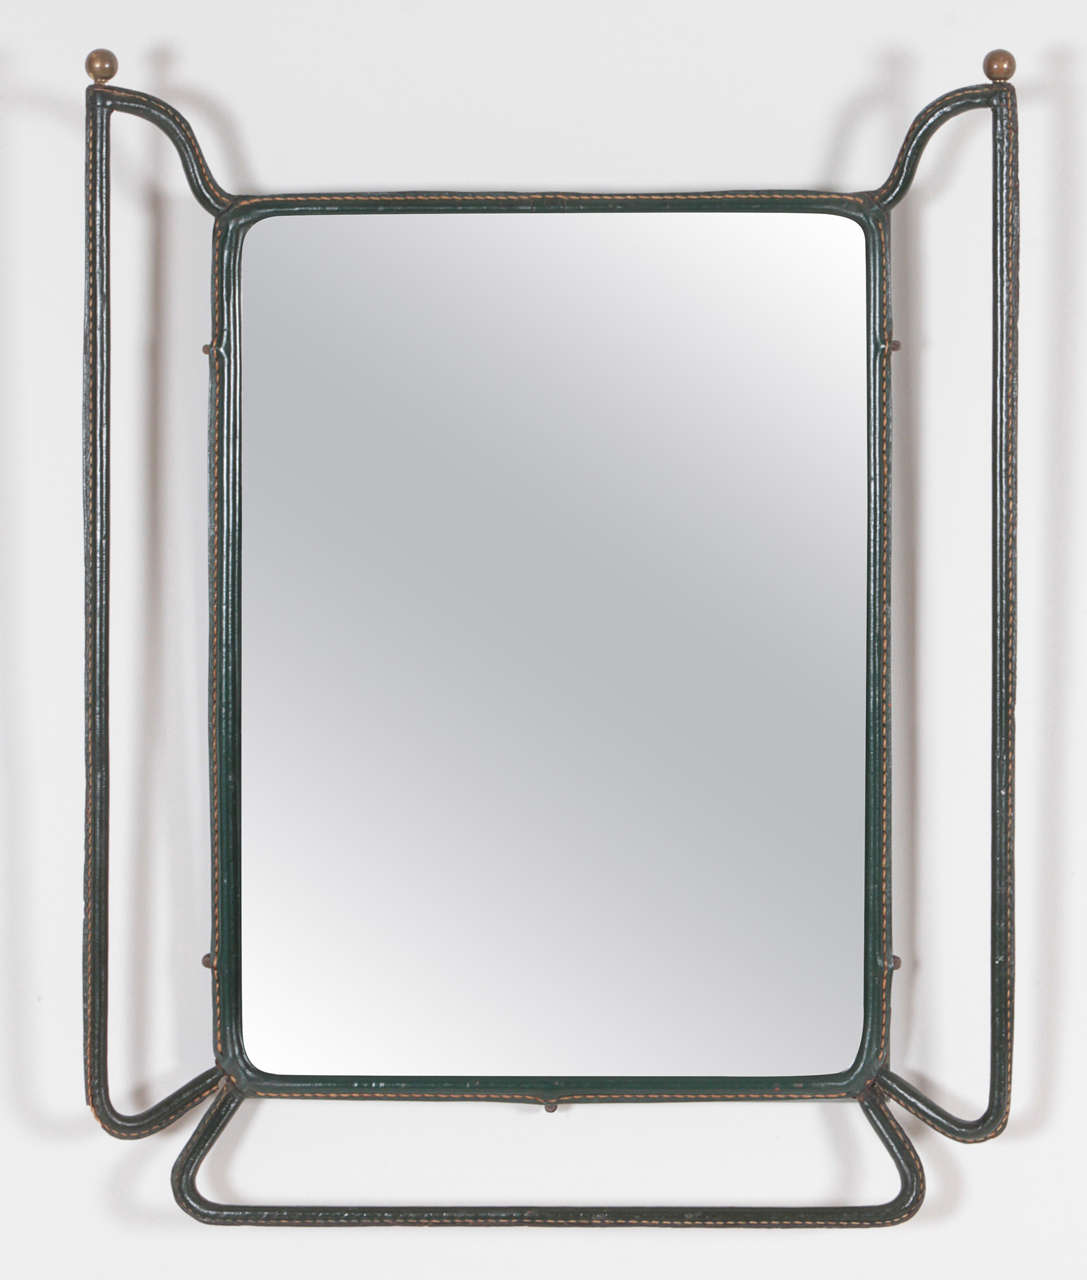 Jacques Adnet, Circa 1950
Mirror frame in Tubular Metal covered in Green Leather with Natural Stitching, Bronze Ball Detail.